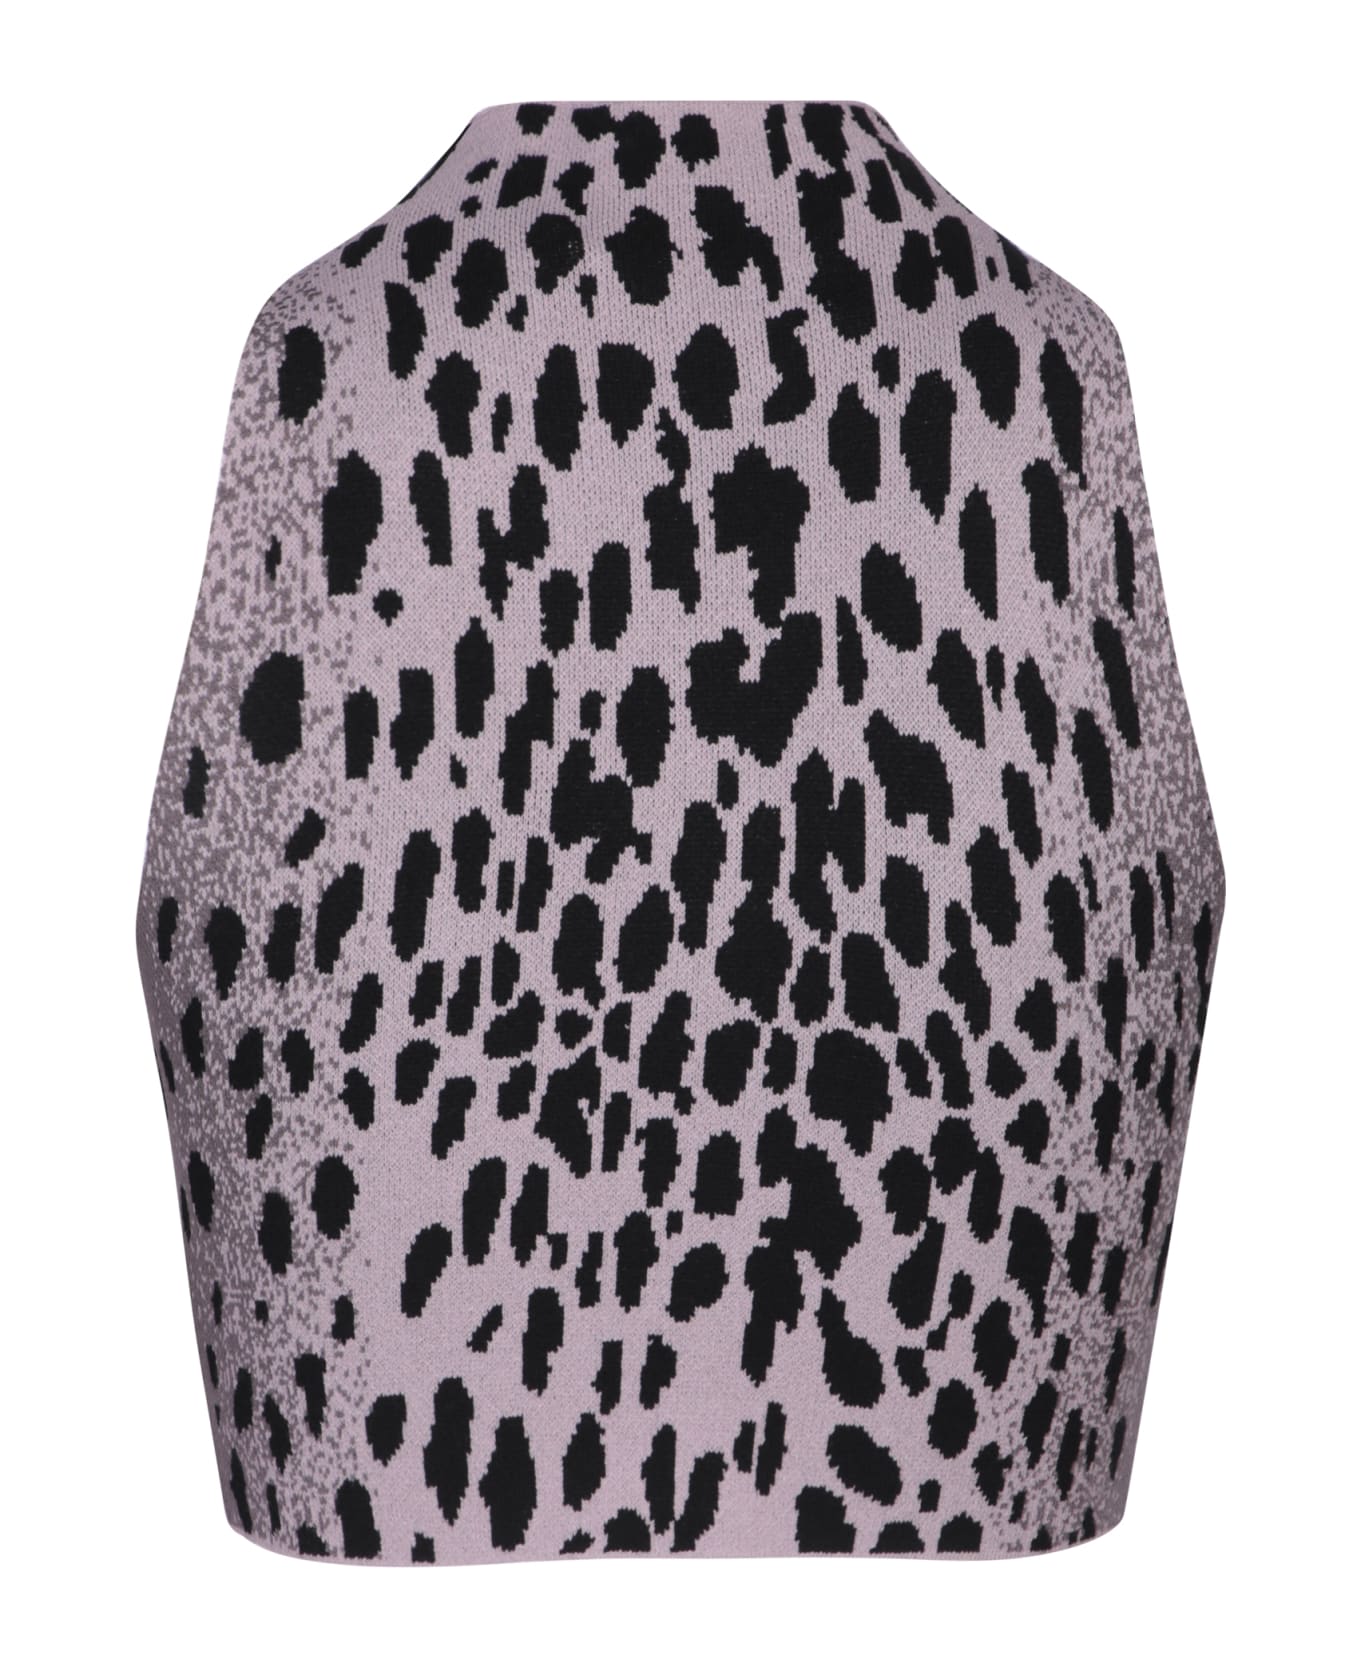 SSHEENA Leopard Knit Crop Top In Lilac And Black By Ssheena - Multi トップス